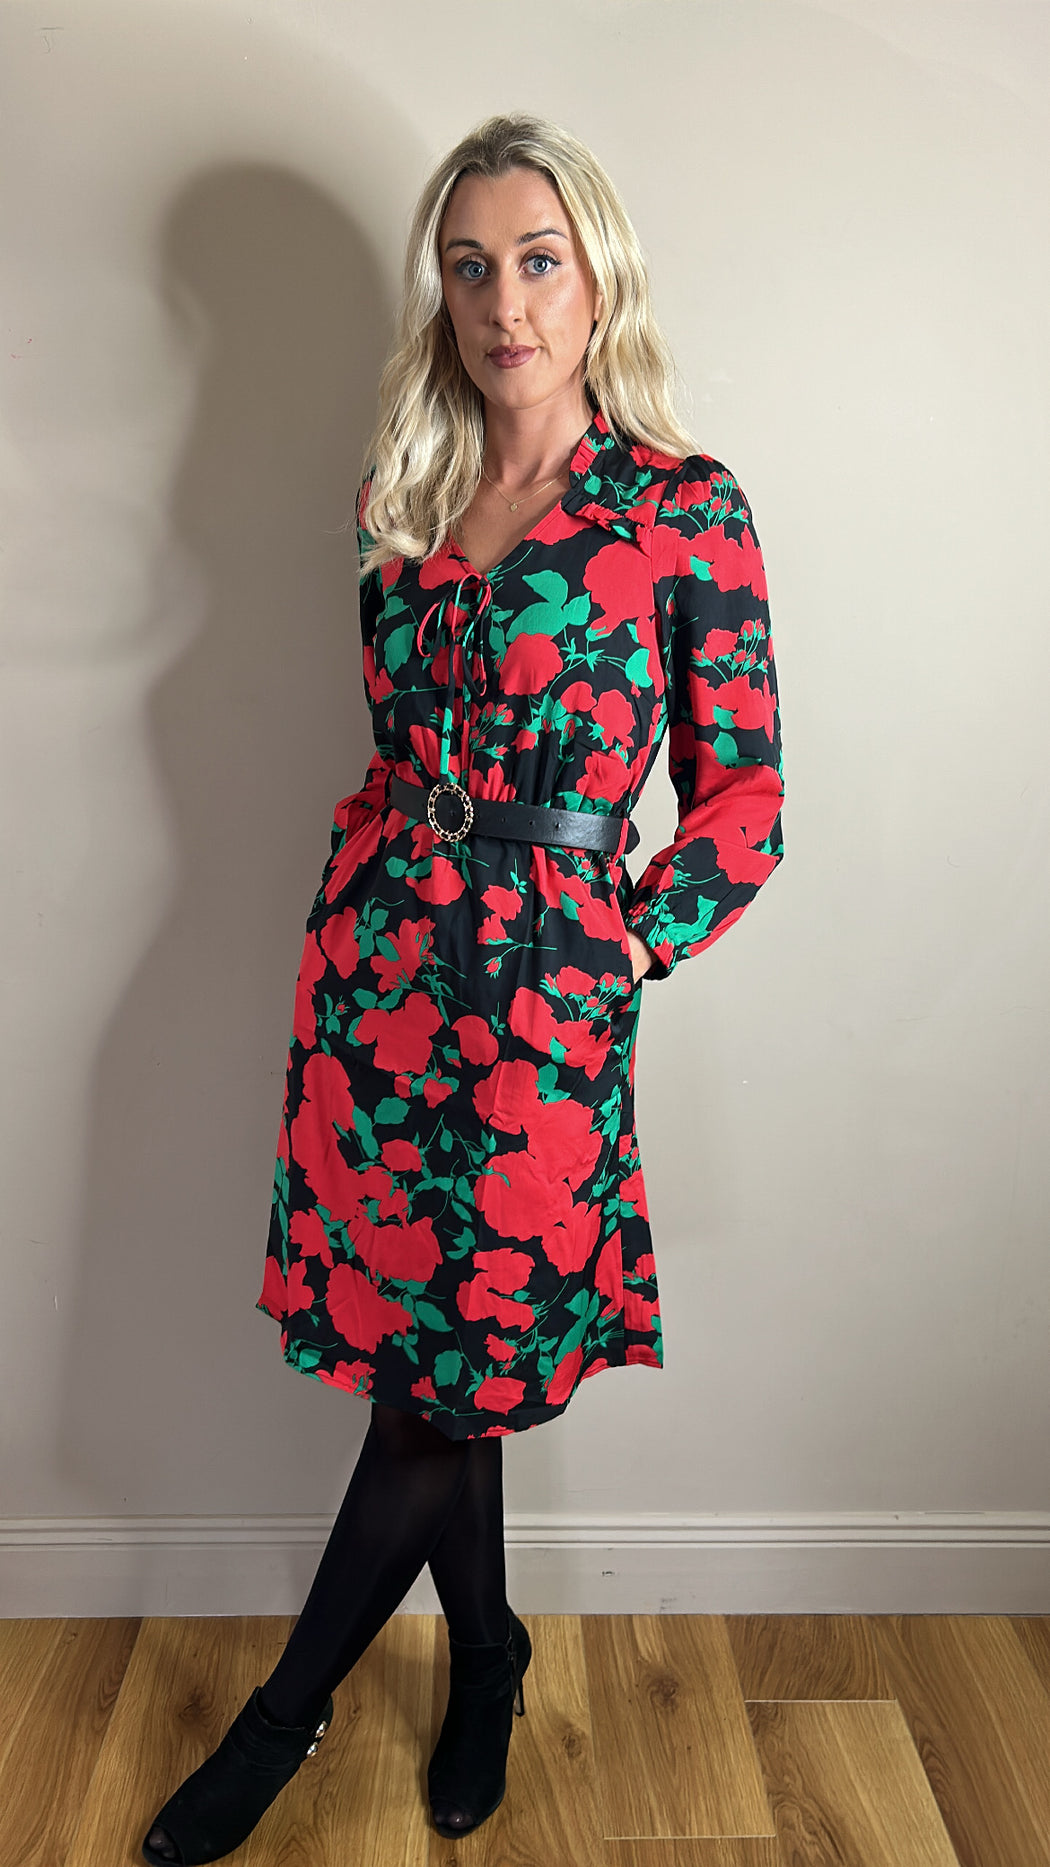 Andrea red floral dress